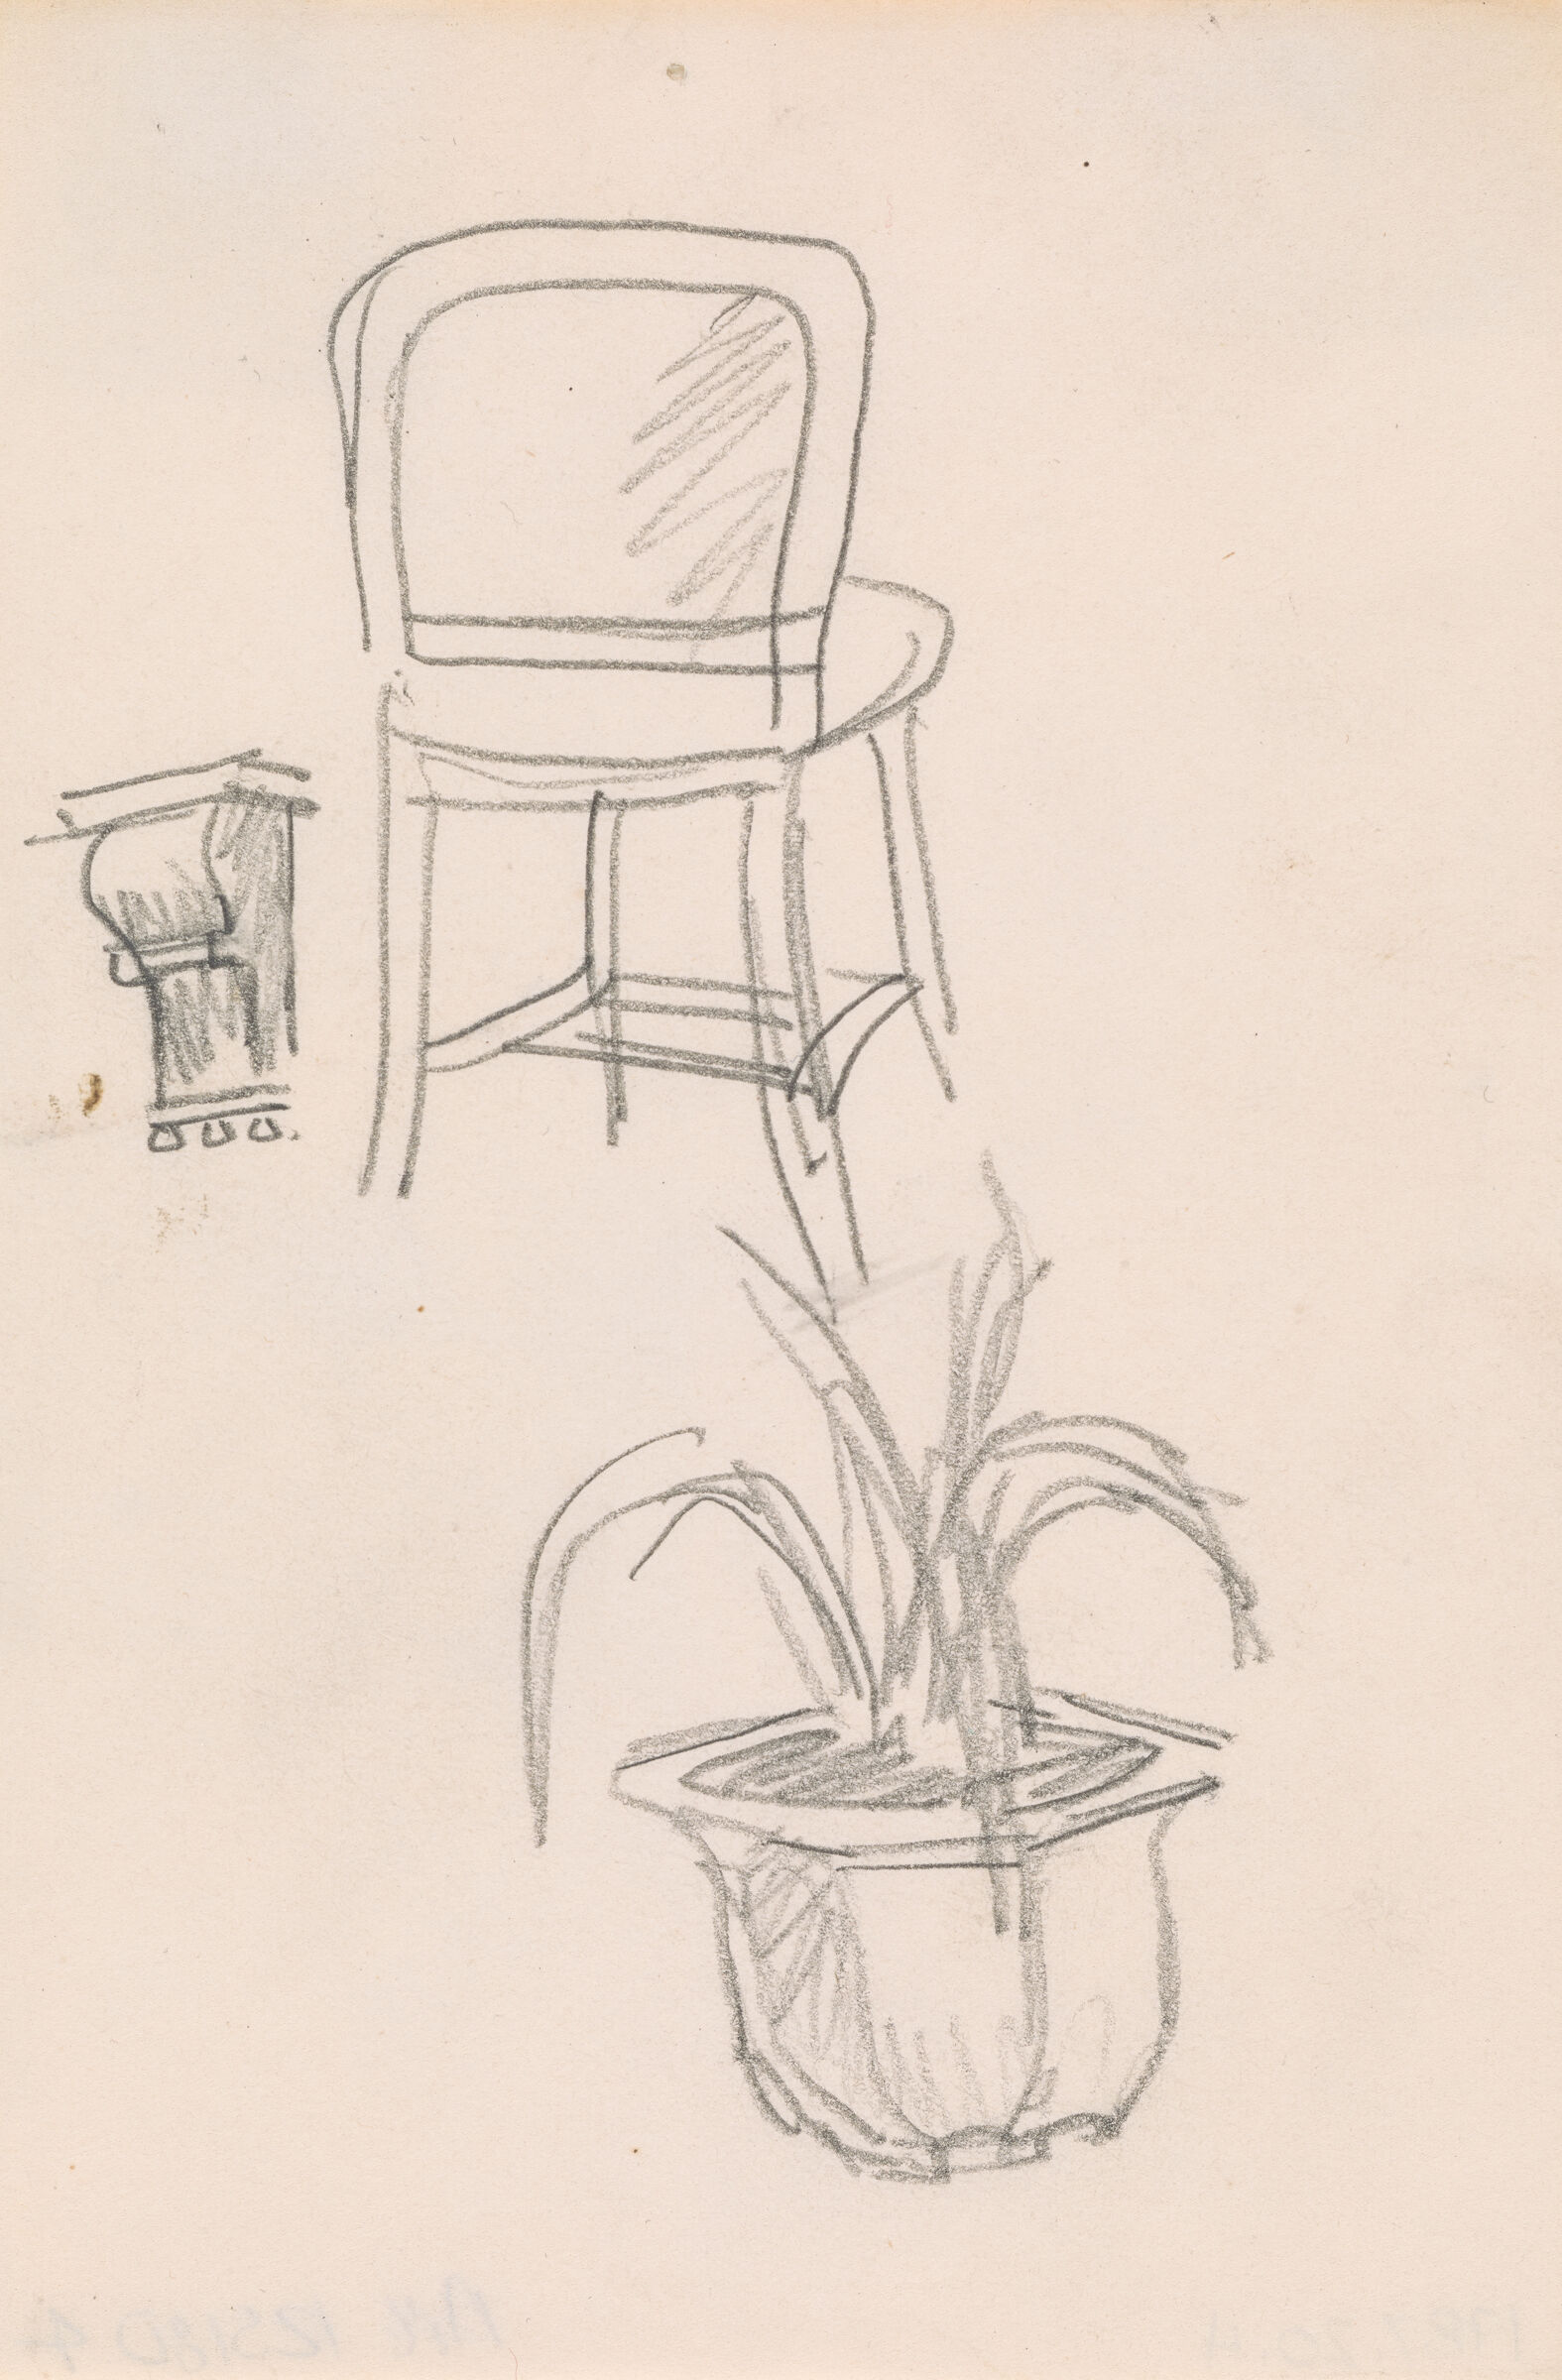 Graphite sketch of a chair, a potted palm and a cornice.